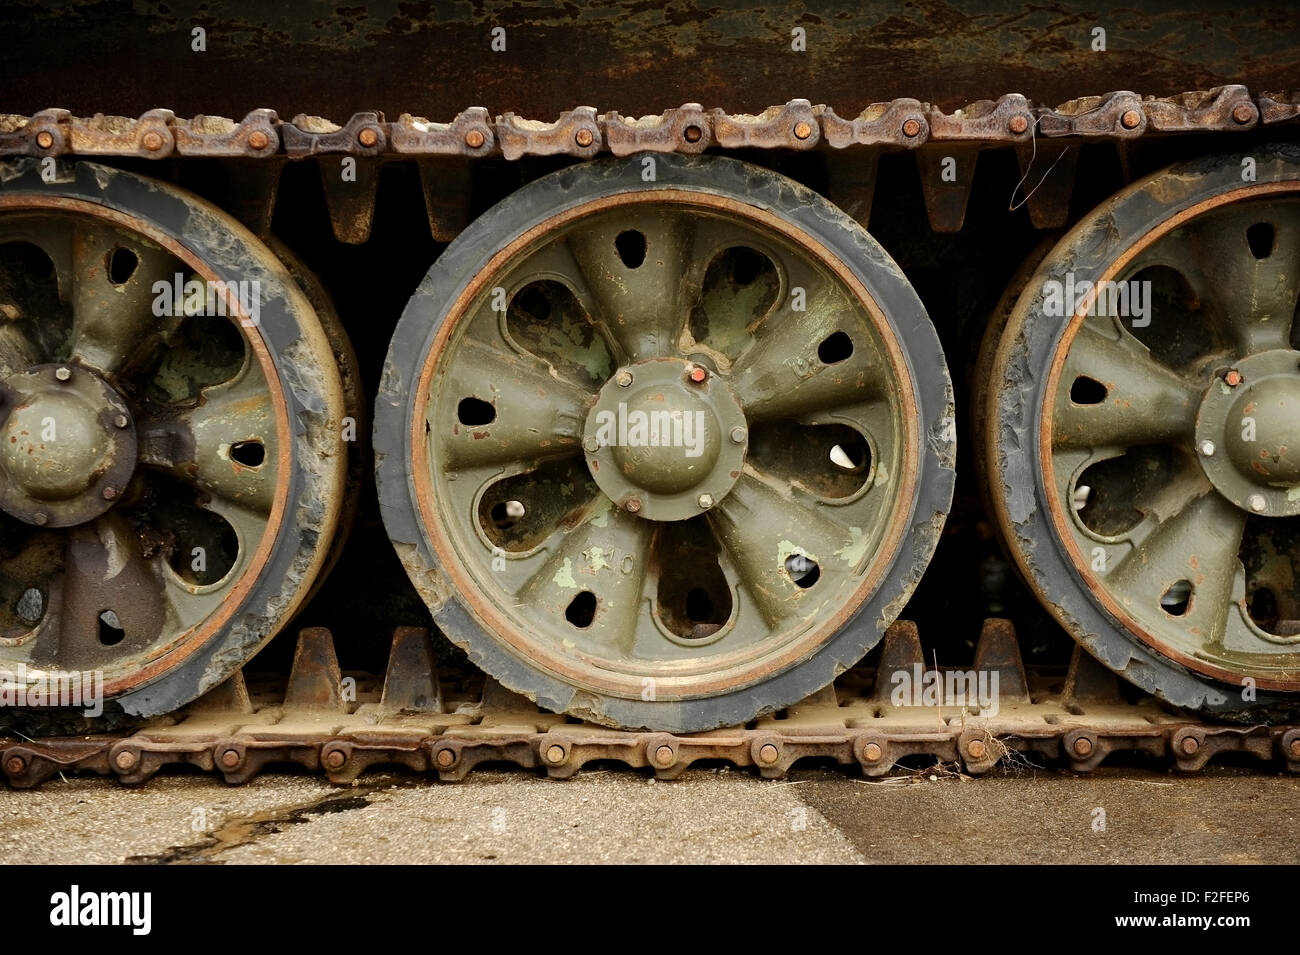 Detail shot with old tank tracks and wheels Stock Photo